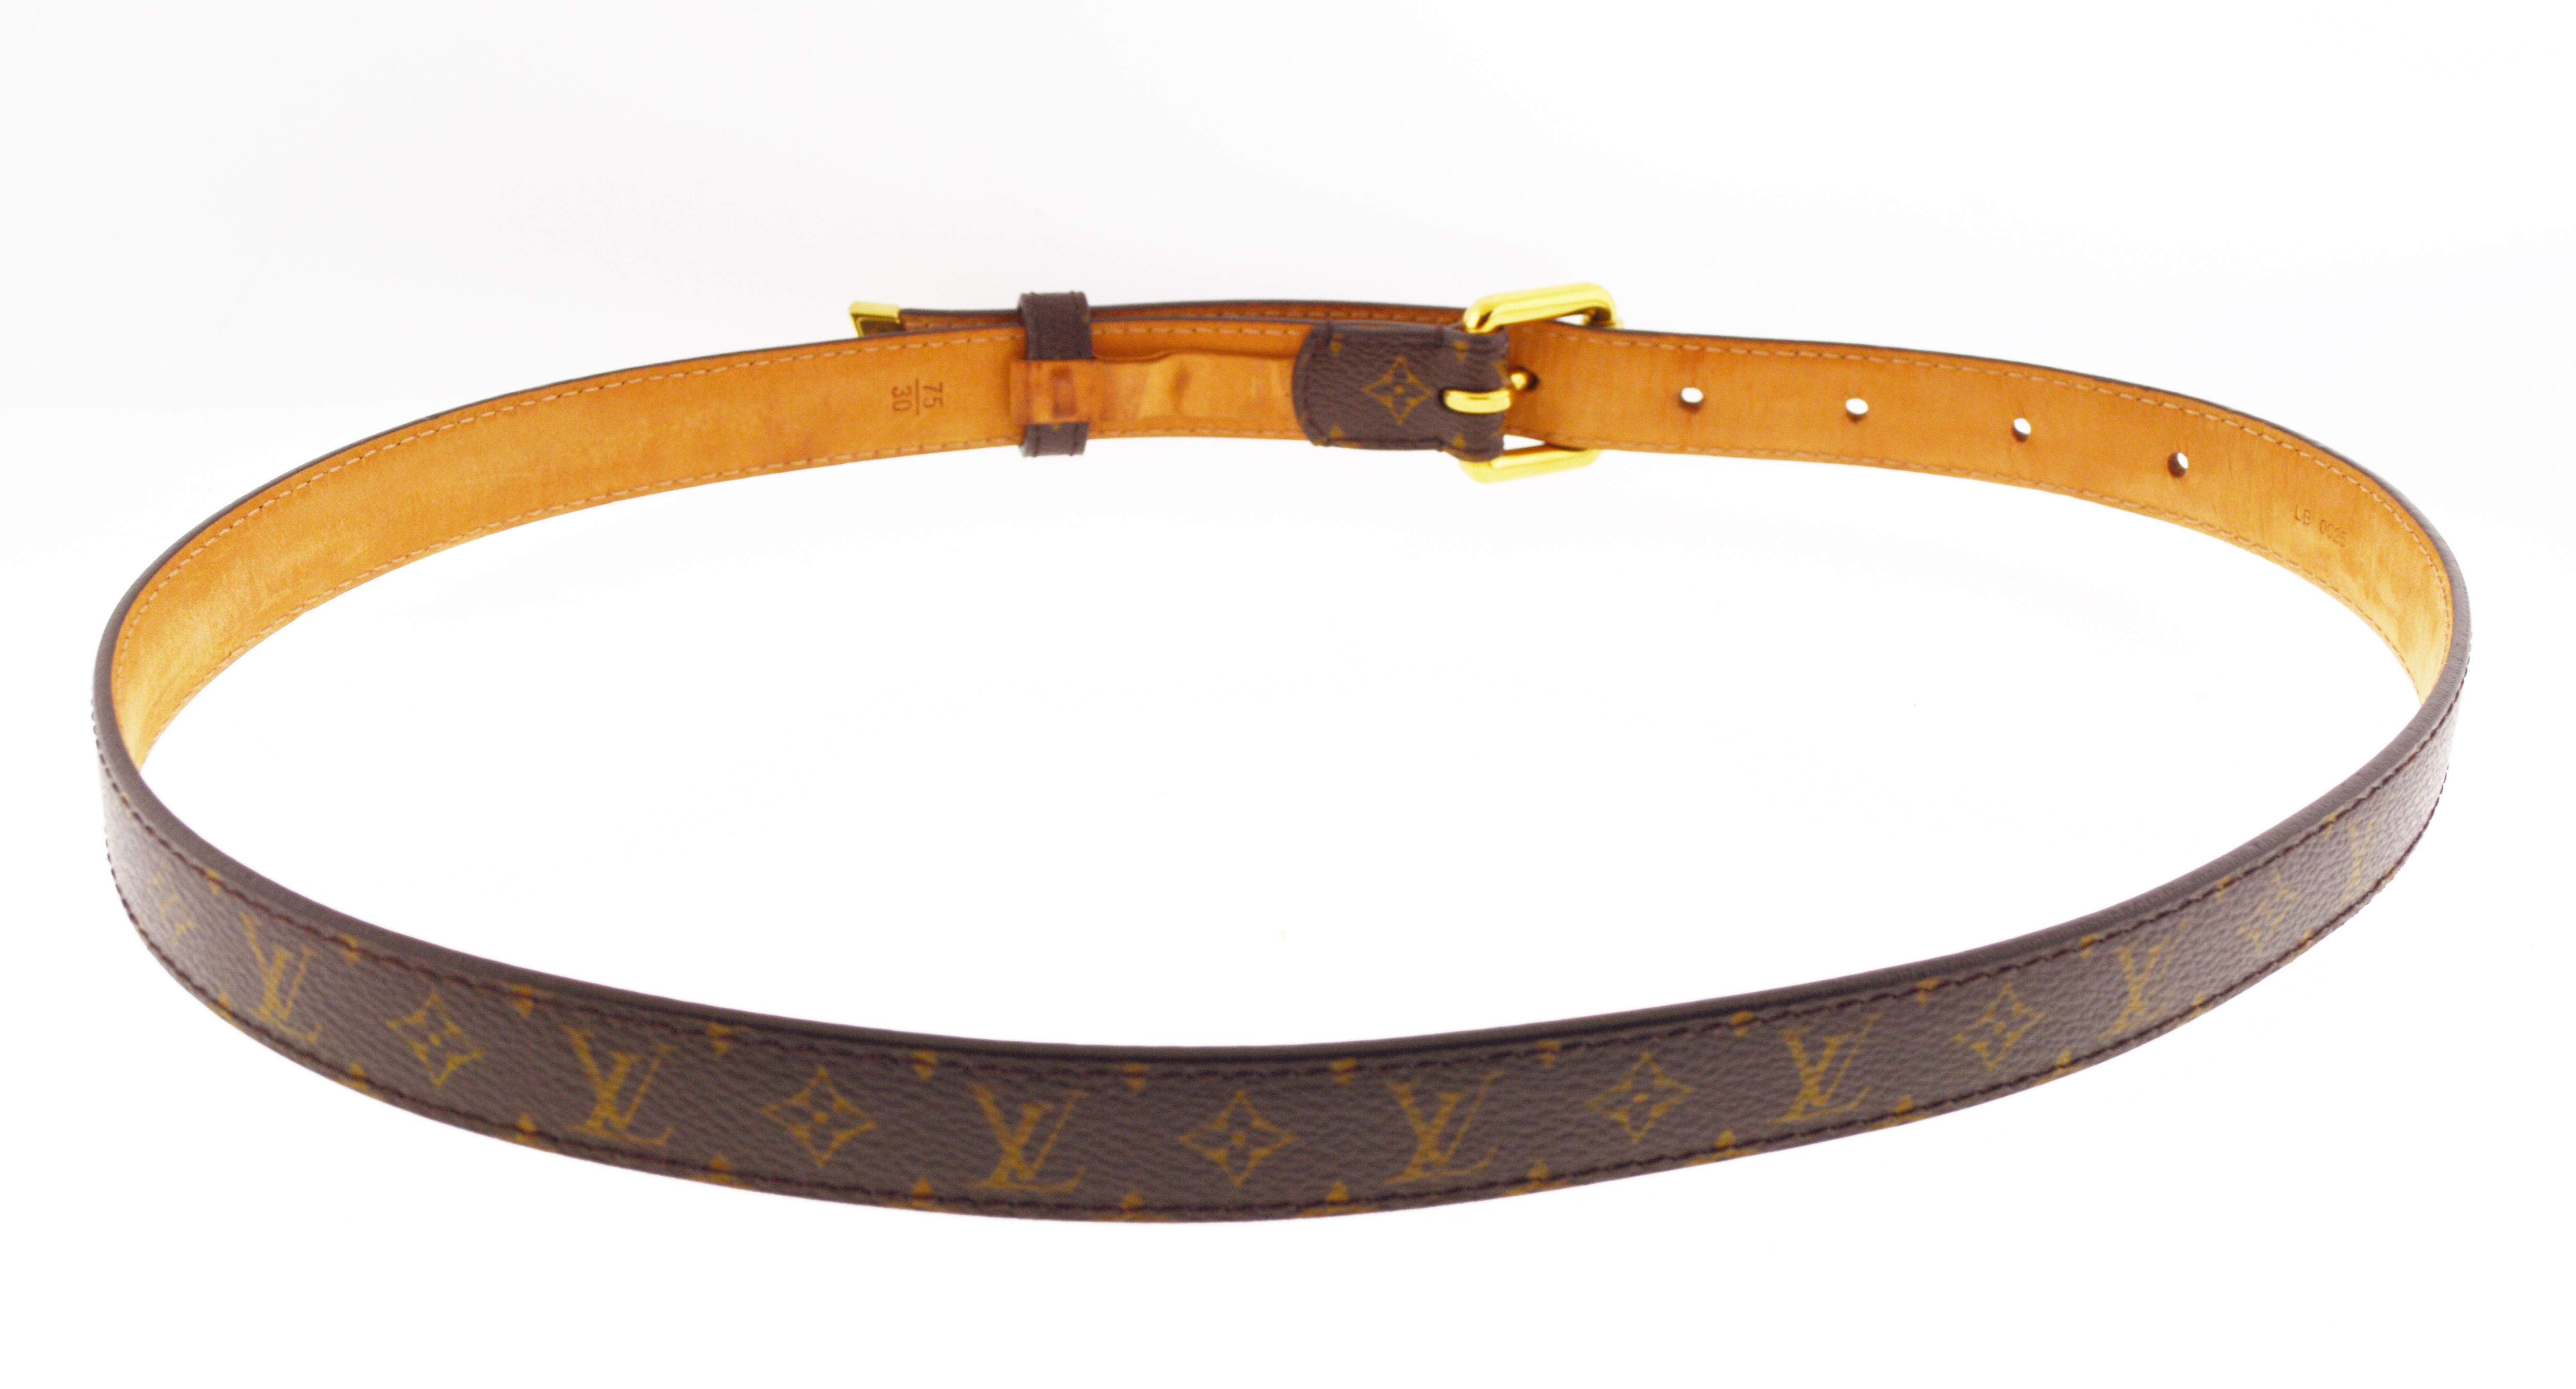 gucci belt size 75 in inches